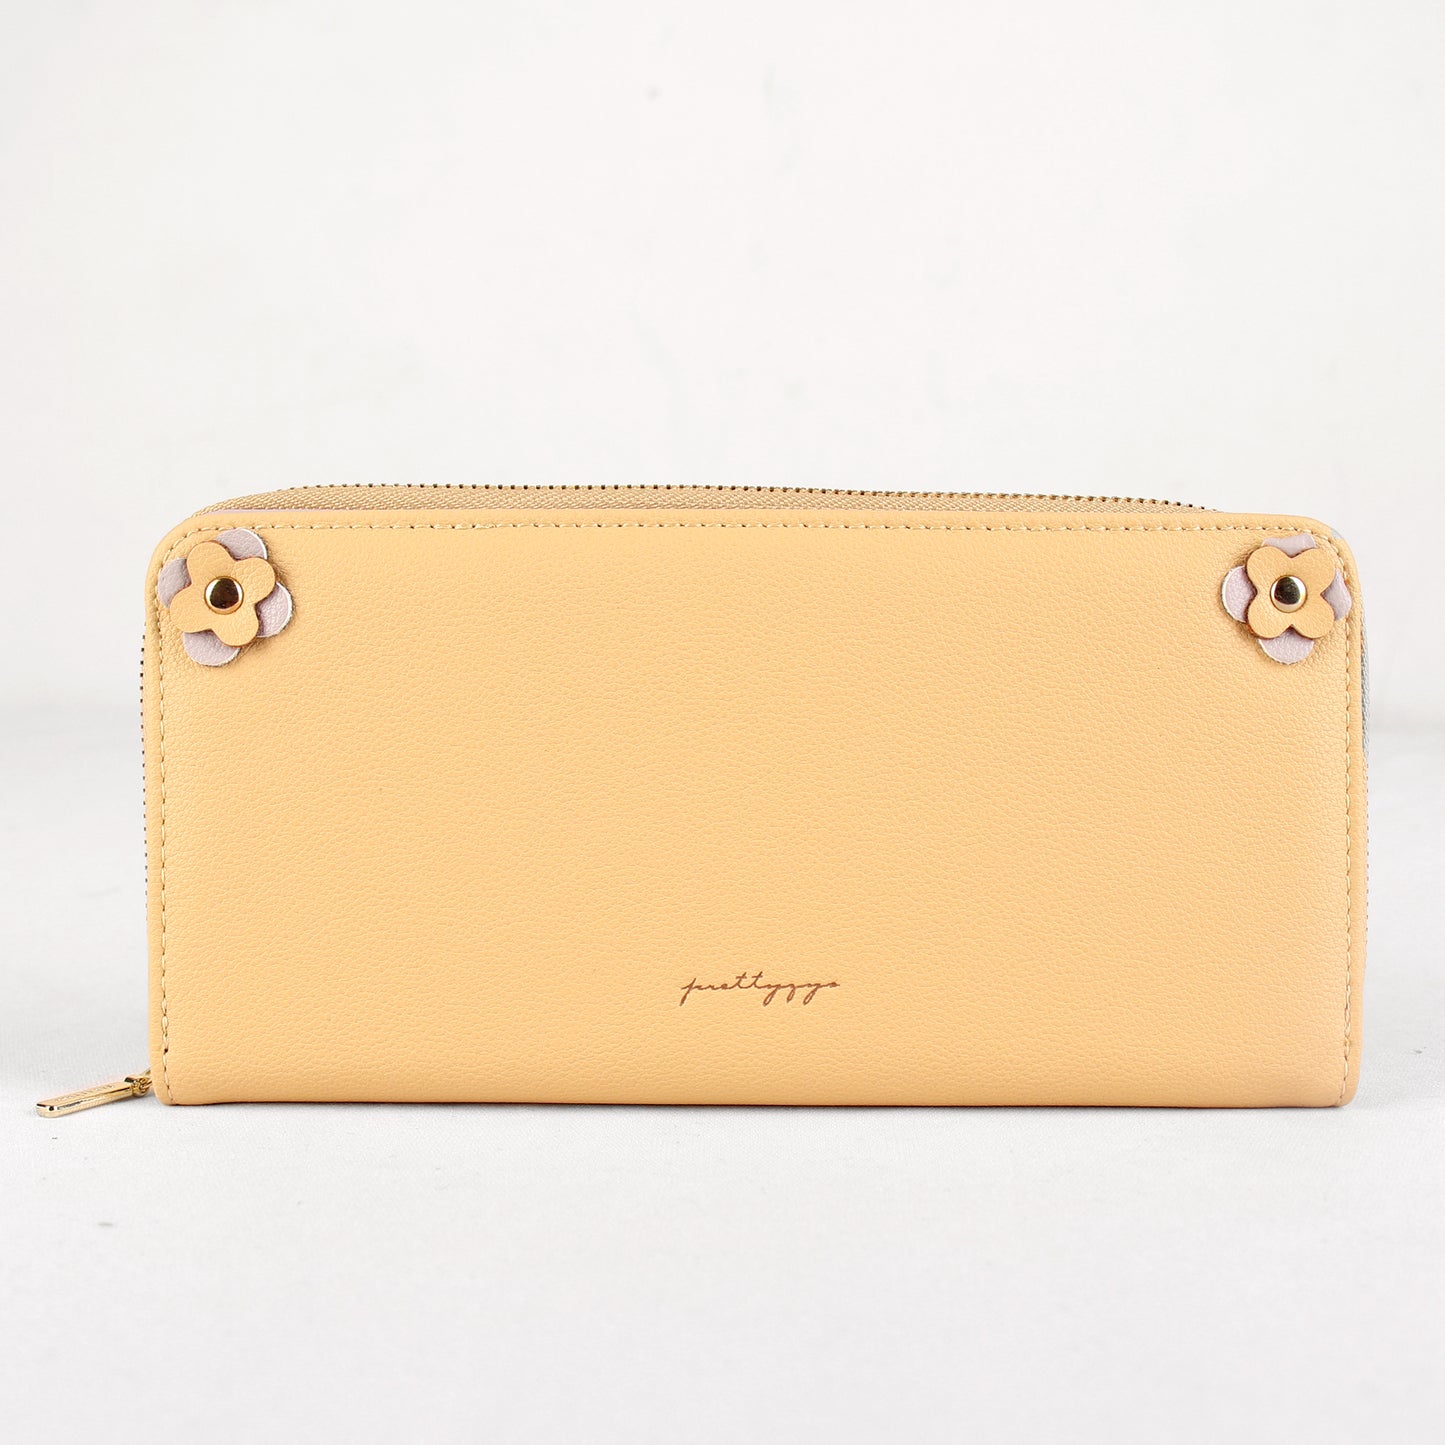 The Exquisite Signature Wallet in Pale Tone